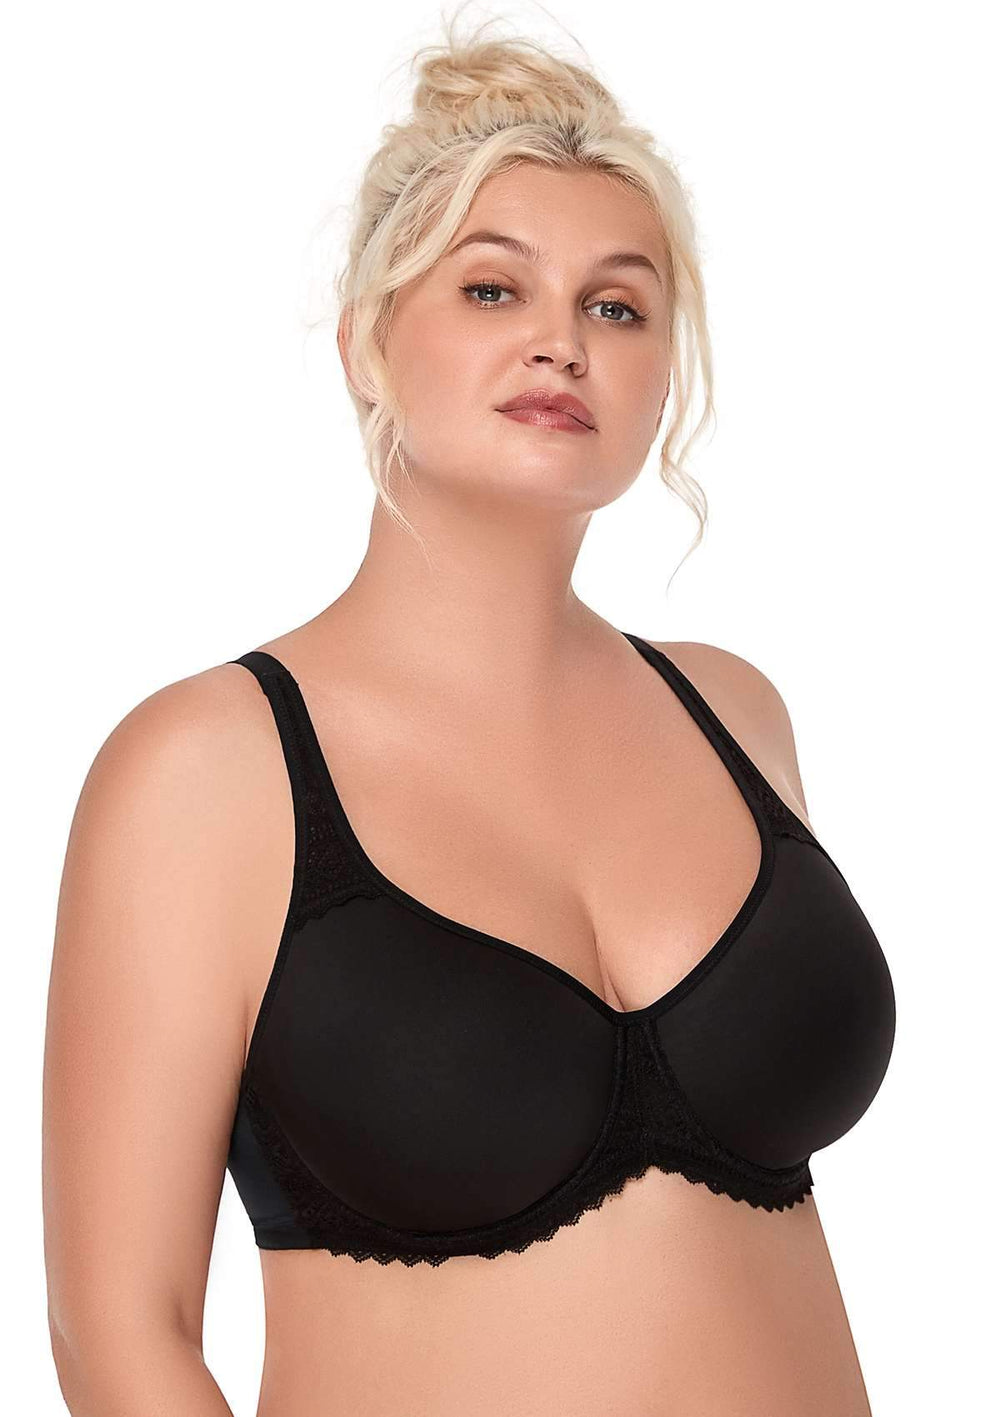 HSIA Plus Size Bras for Women Full Coverage Back Fat Underwire Unlined Bras  Black 42C